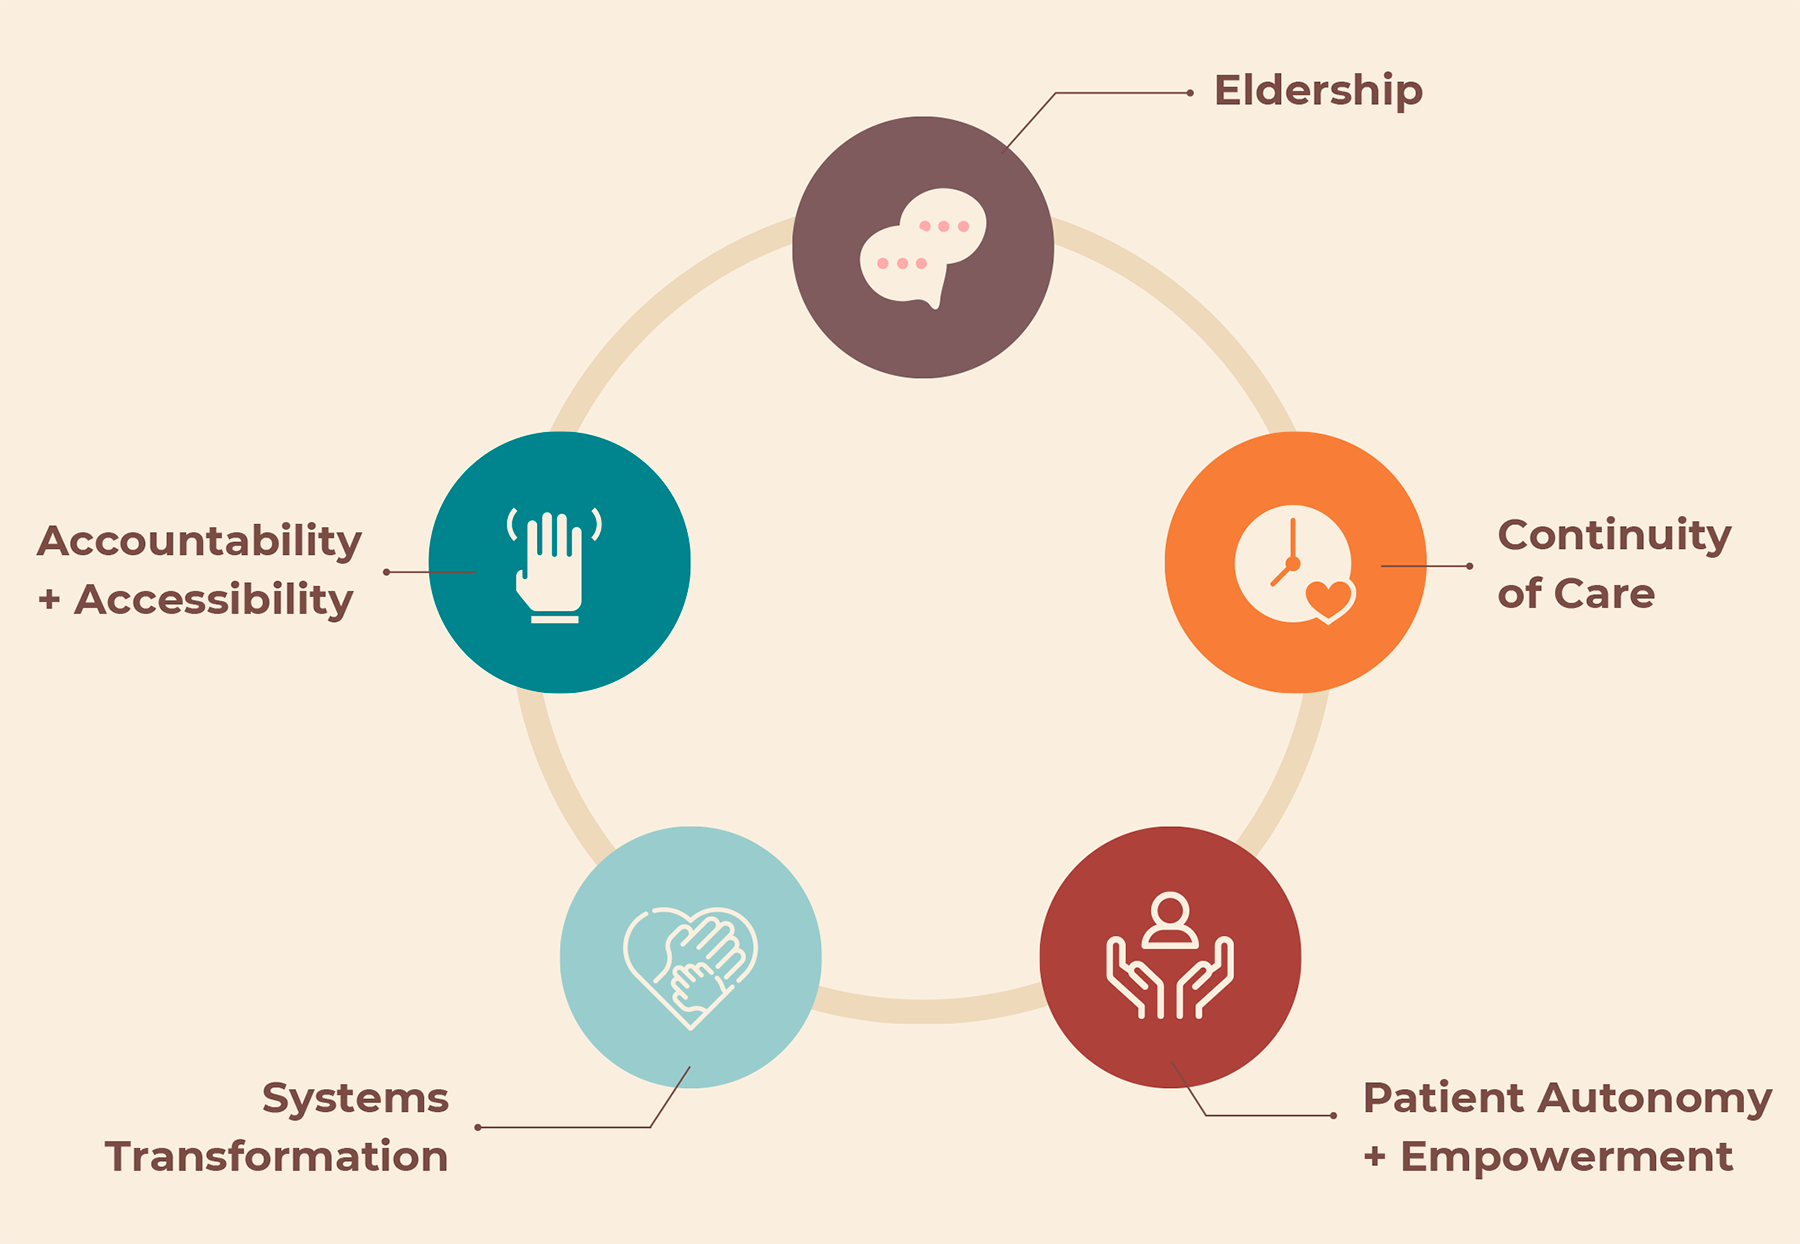 Illustration showing each aspect of care provided: Eldership, Continuity of Care, Patient Autonomy and Empowerment, Systems Transformation, Accountability and Accessibility 